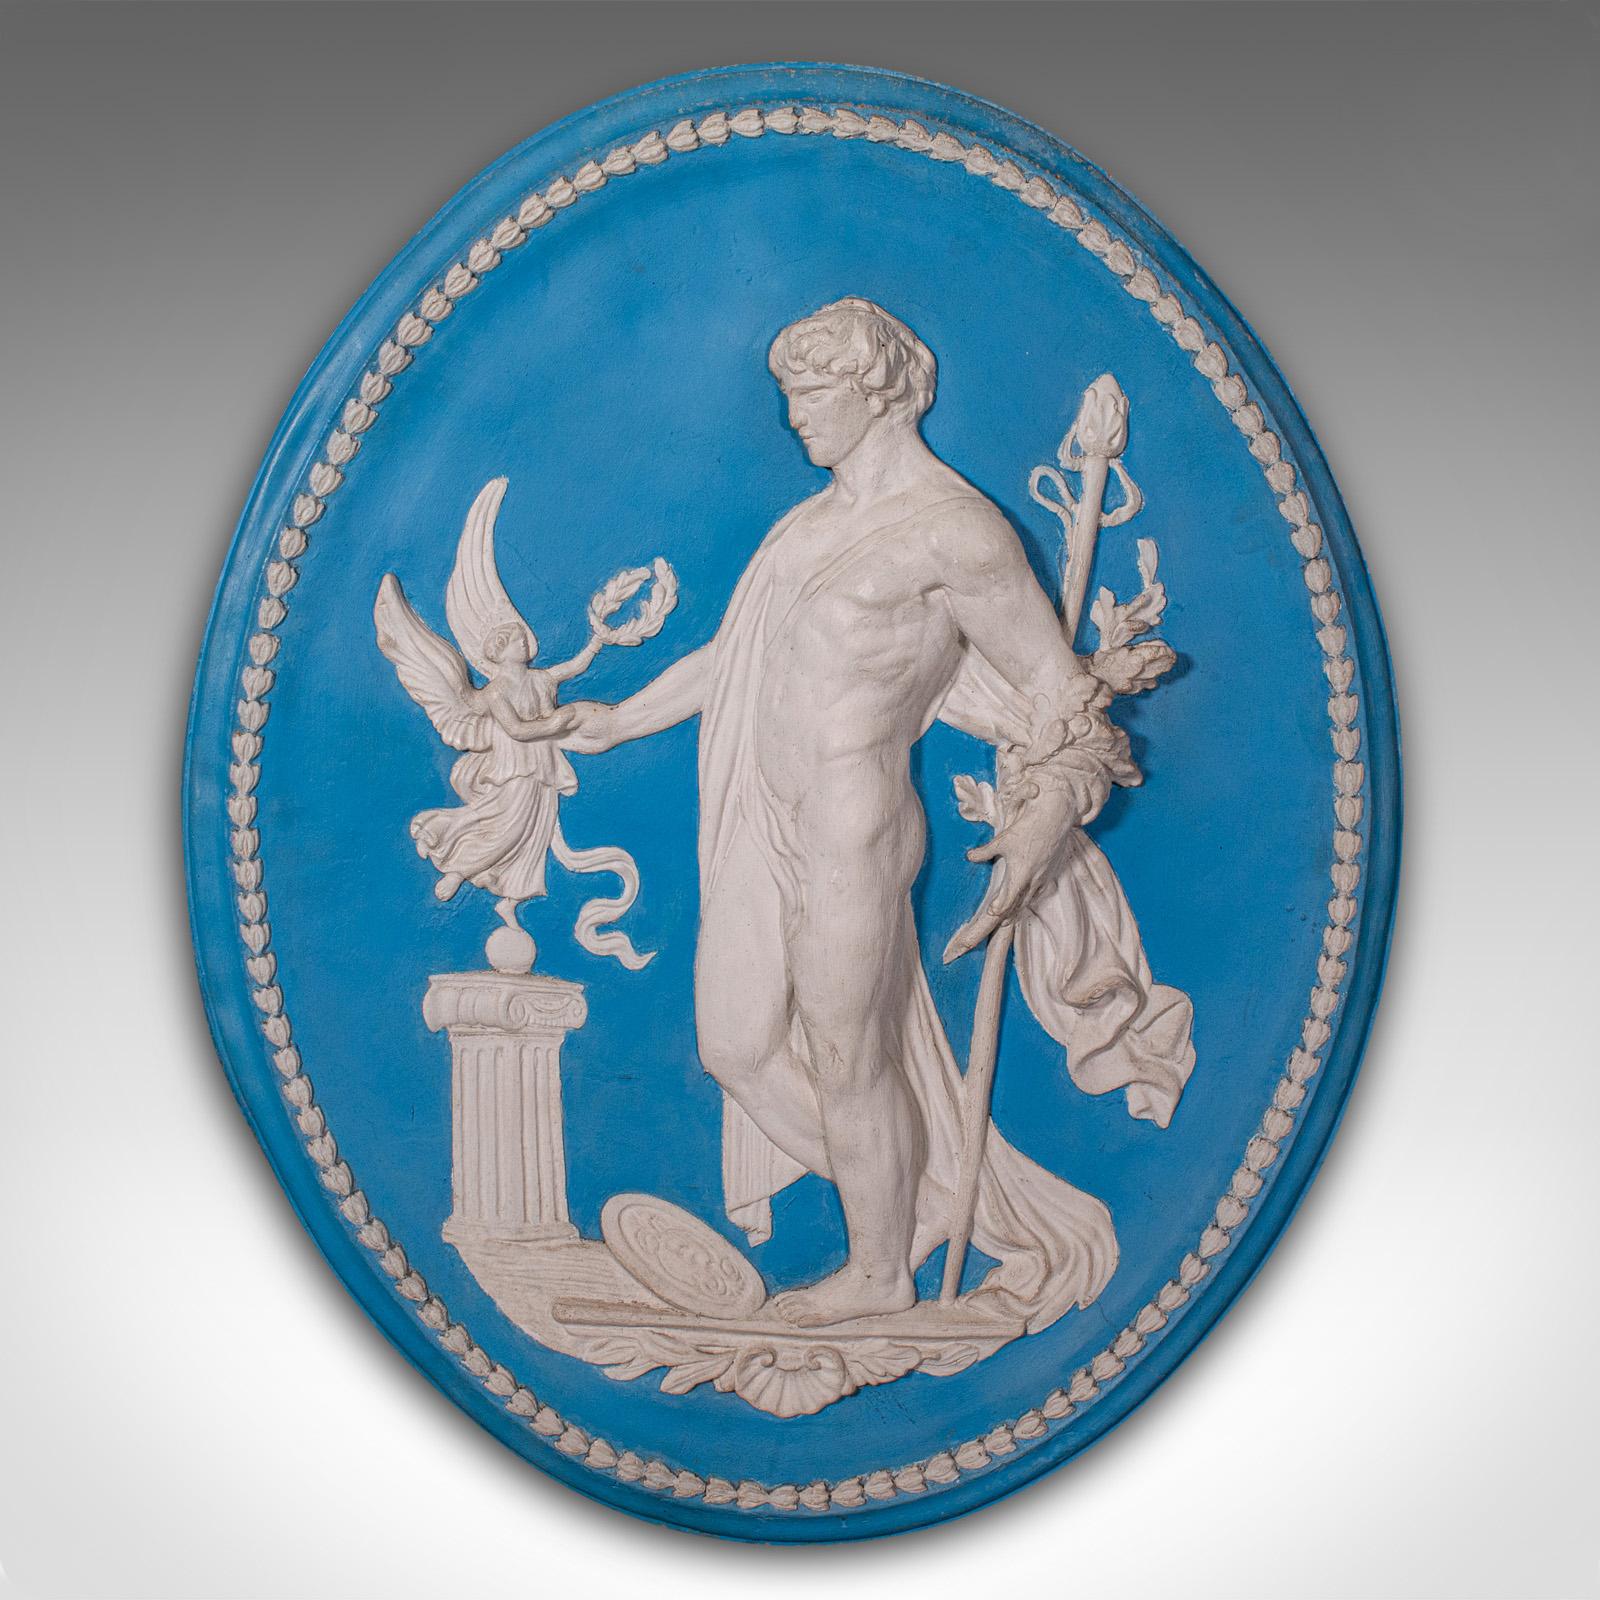 This is a tall vintage decorative relief plaque. An English, reconstituted stone neo-classical oval frieze in the manner of Jasperware, dating to the late 20th century, circa 1980.

Delightful classical appeal, the cameo form inspired by